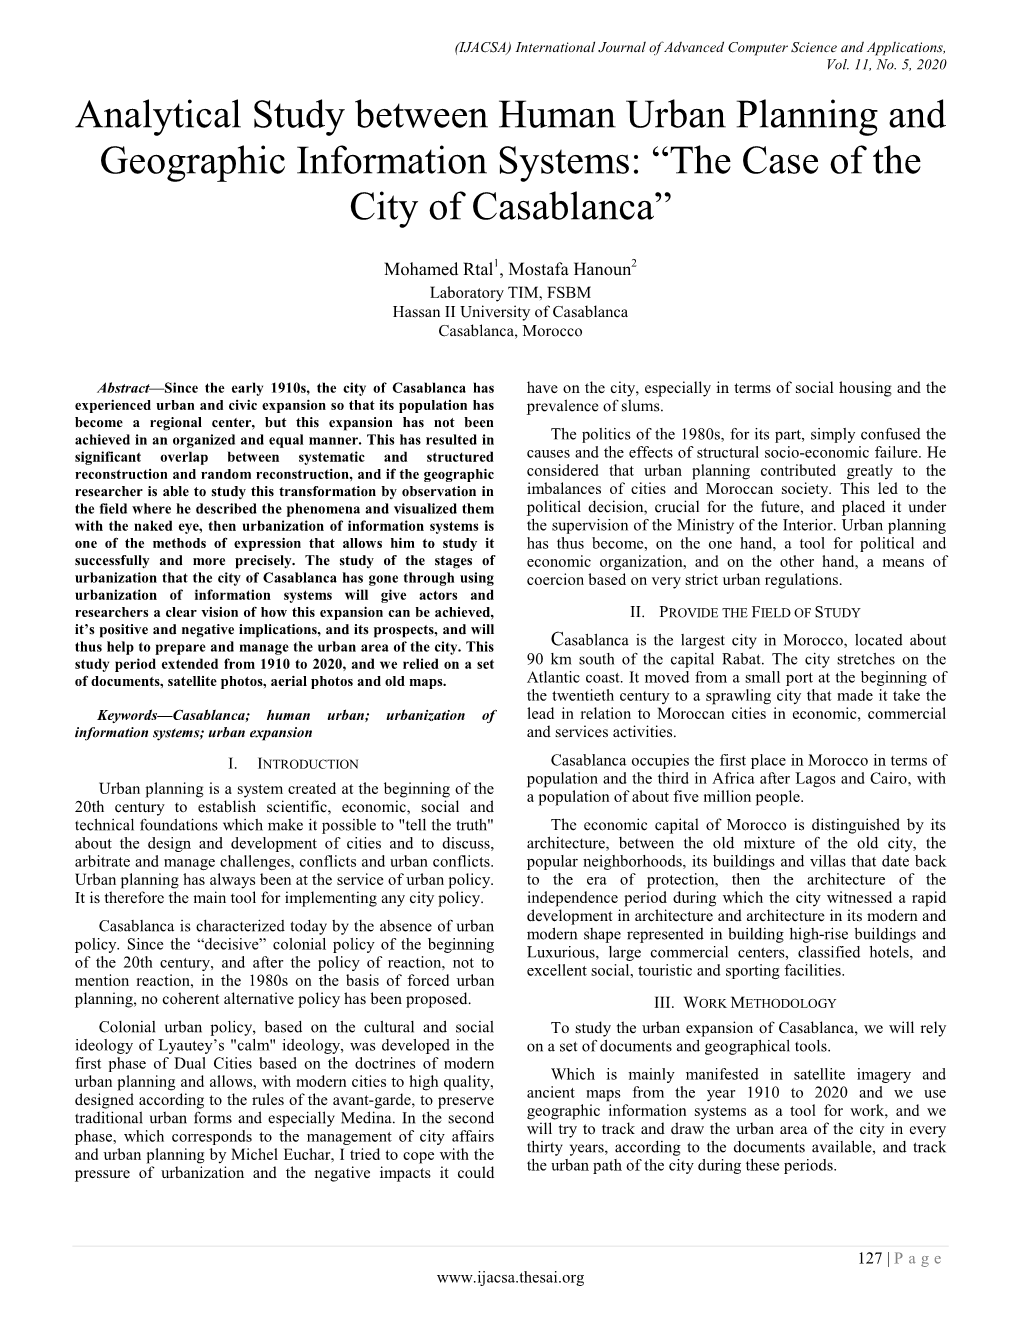 Analytical Study Between Human Urban Planning and Geographic Information Systems: “The Case of the City of Casablanca”